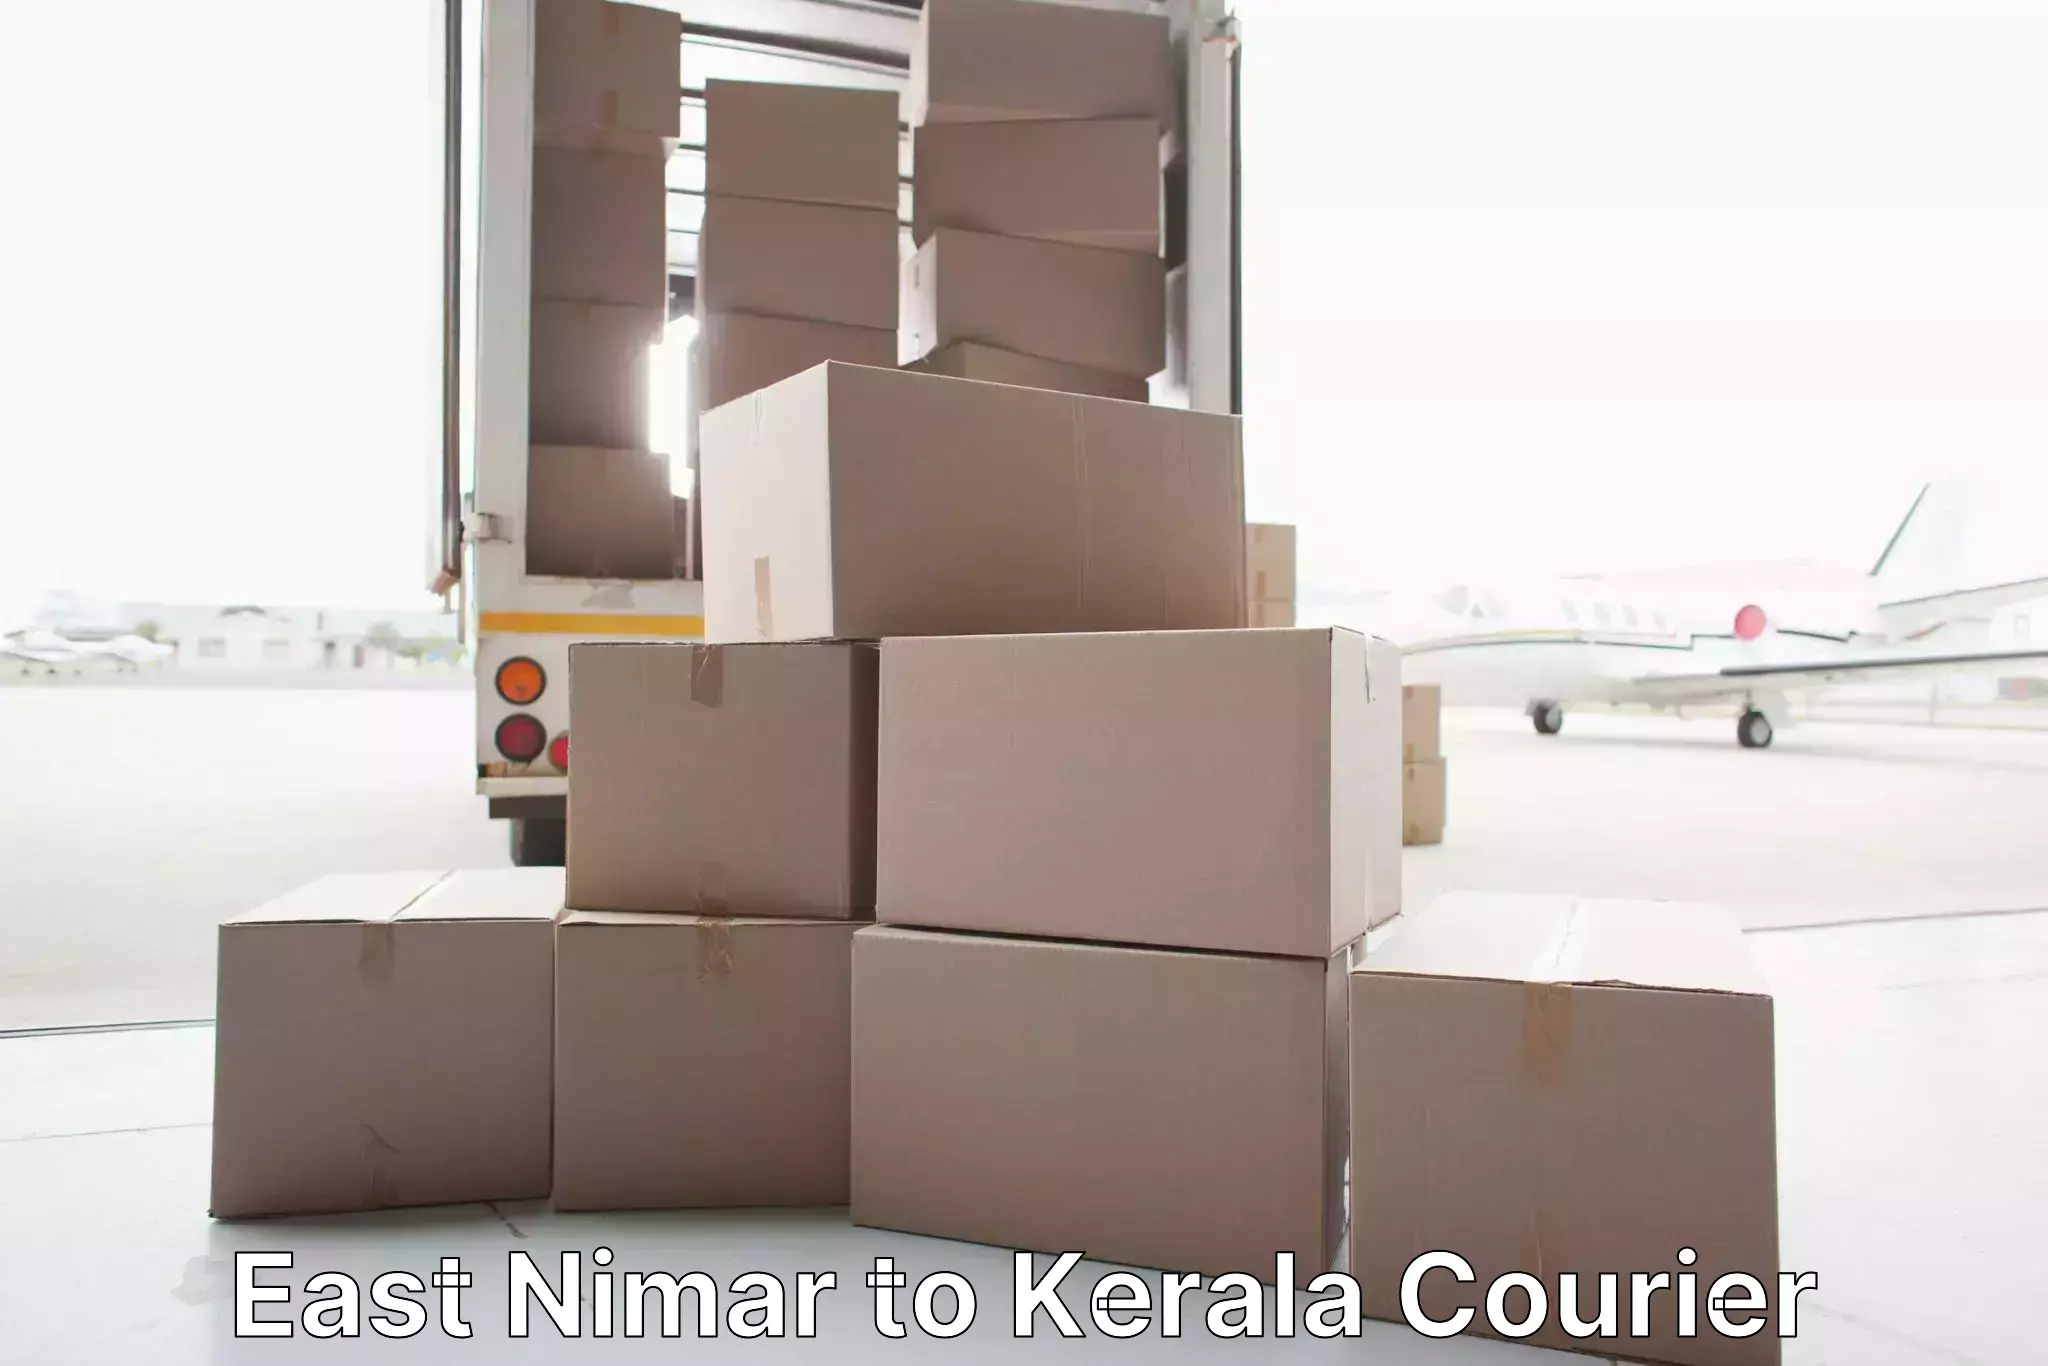 Customized relocation services East Nimar to Cochin